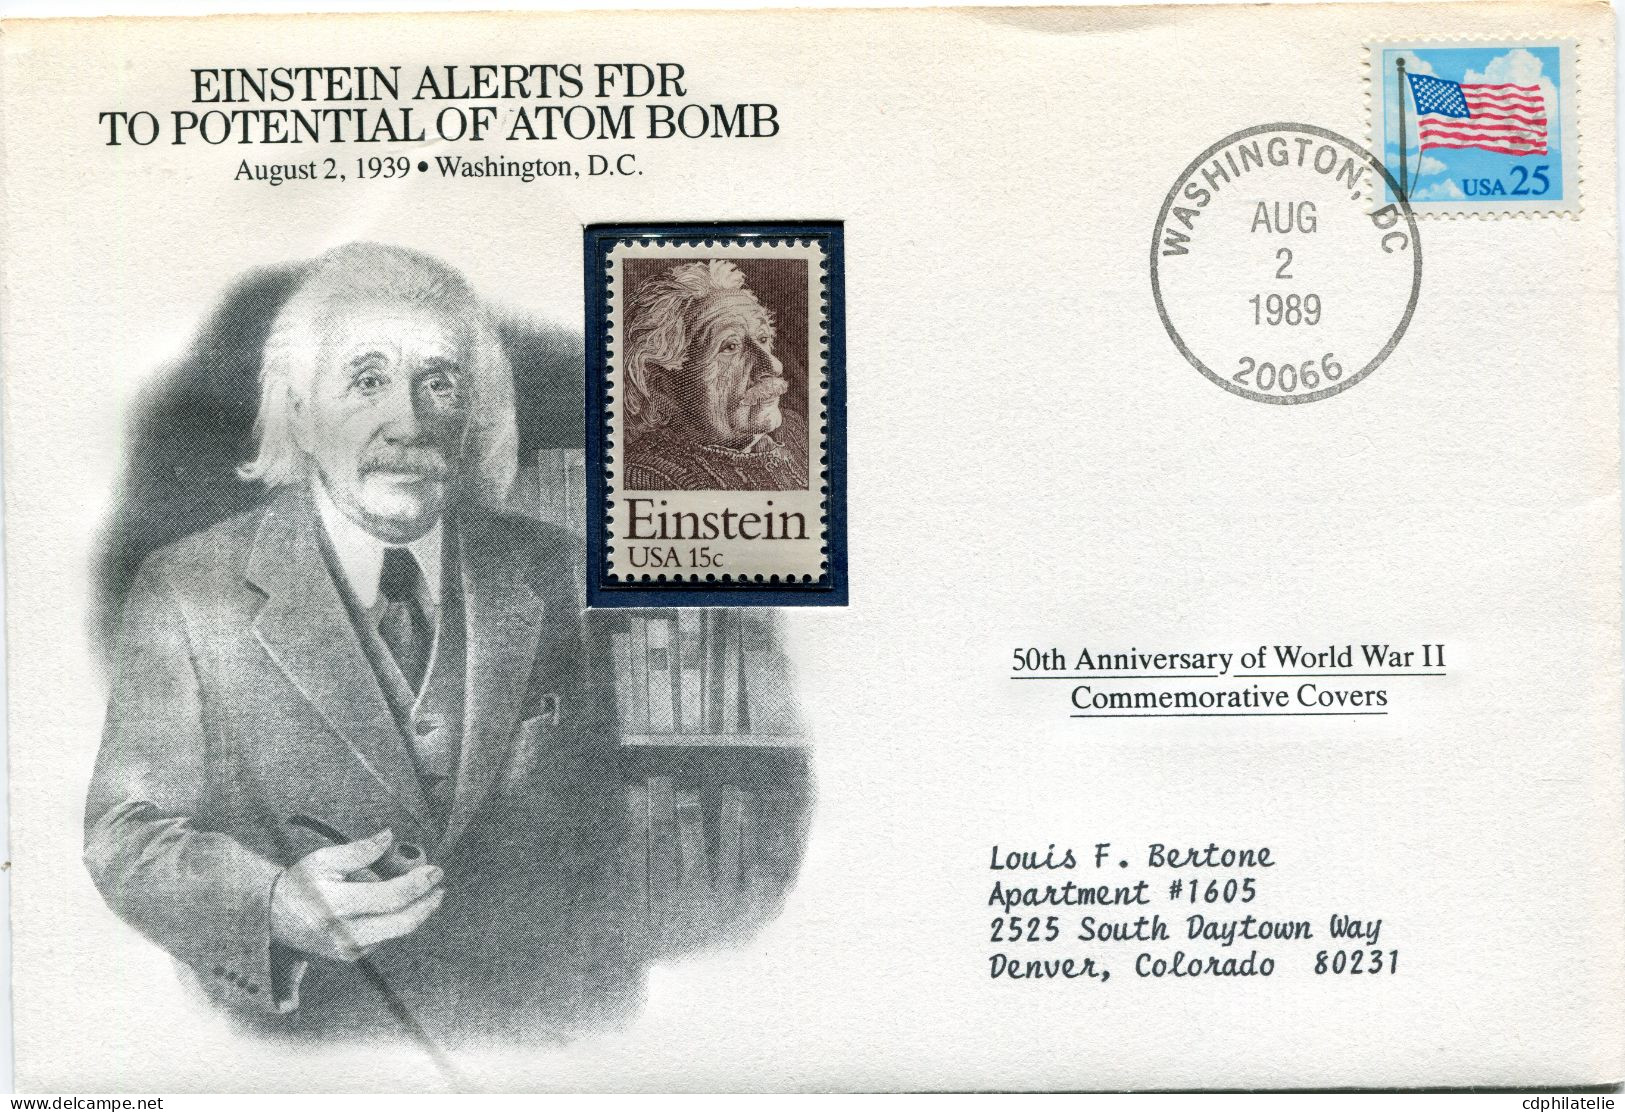 ENVELOPPE ILLUSTREE " 50th ANNIVERSARY OF WORLD WAR II " EINSTEIN ALERTS FDR TO POTENTIAL OF ATOM BOMB AUGUST 2 1939.... - Guerre Mondiale (Seconde)